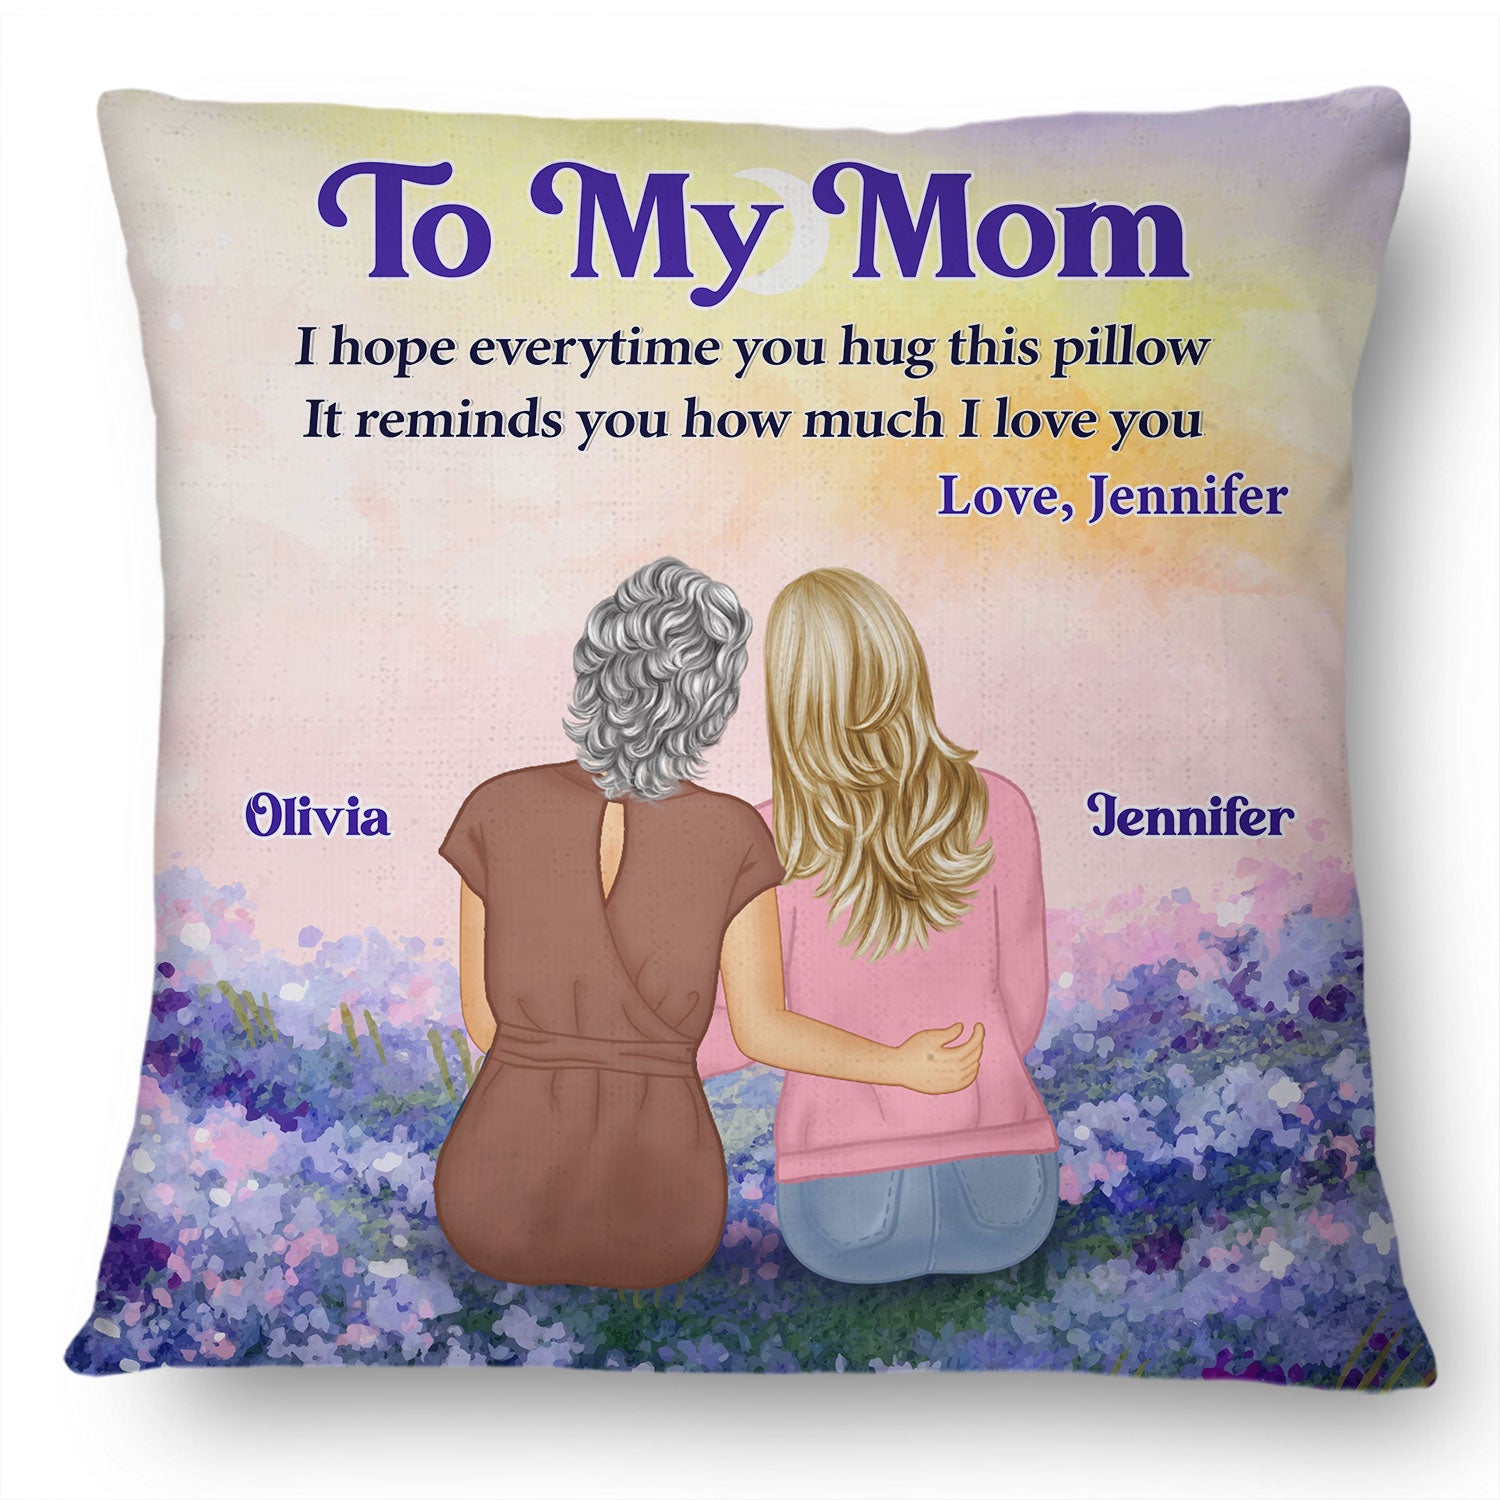 It Reminds You How Much I Love You - Gift For Daughter, Mother - Personalized Pillow